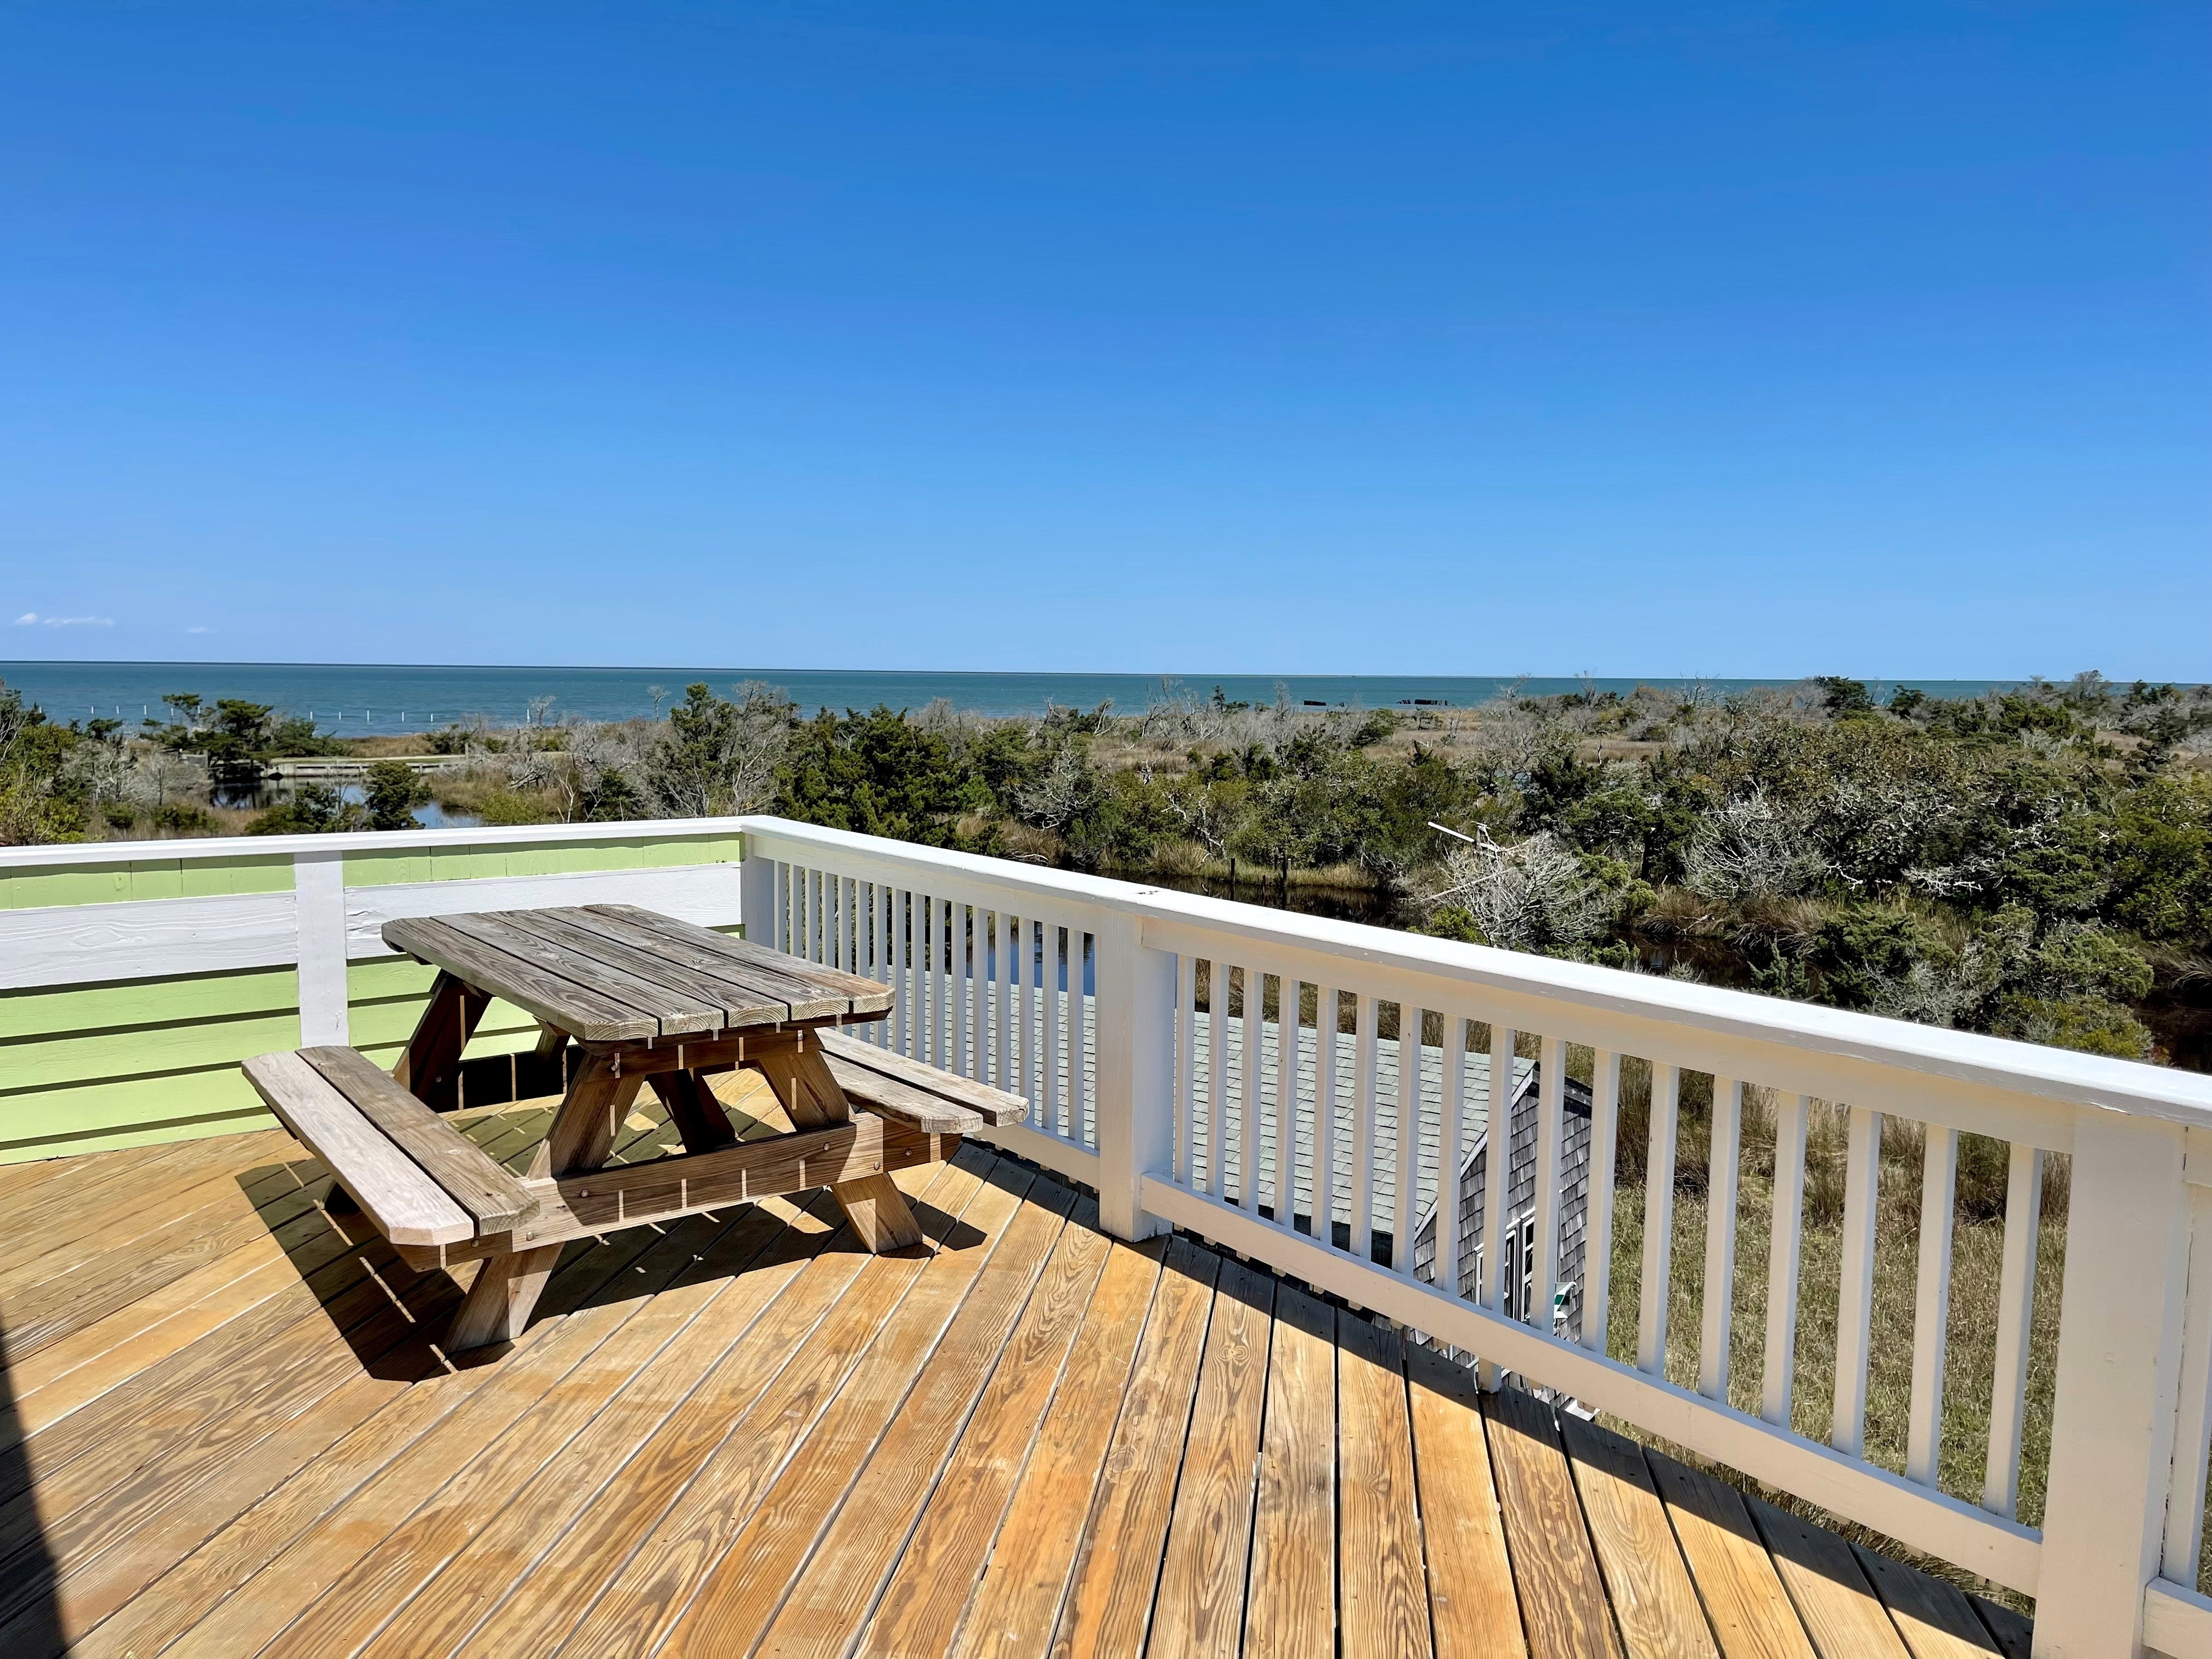 Second Floor Deck with View of Pamlico Sound